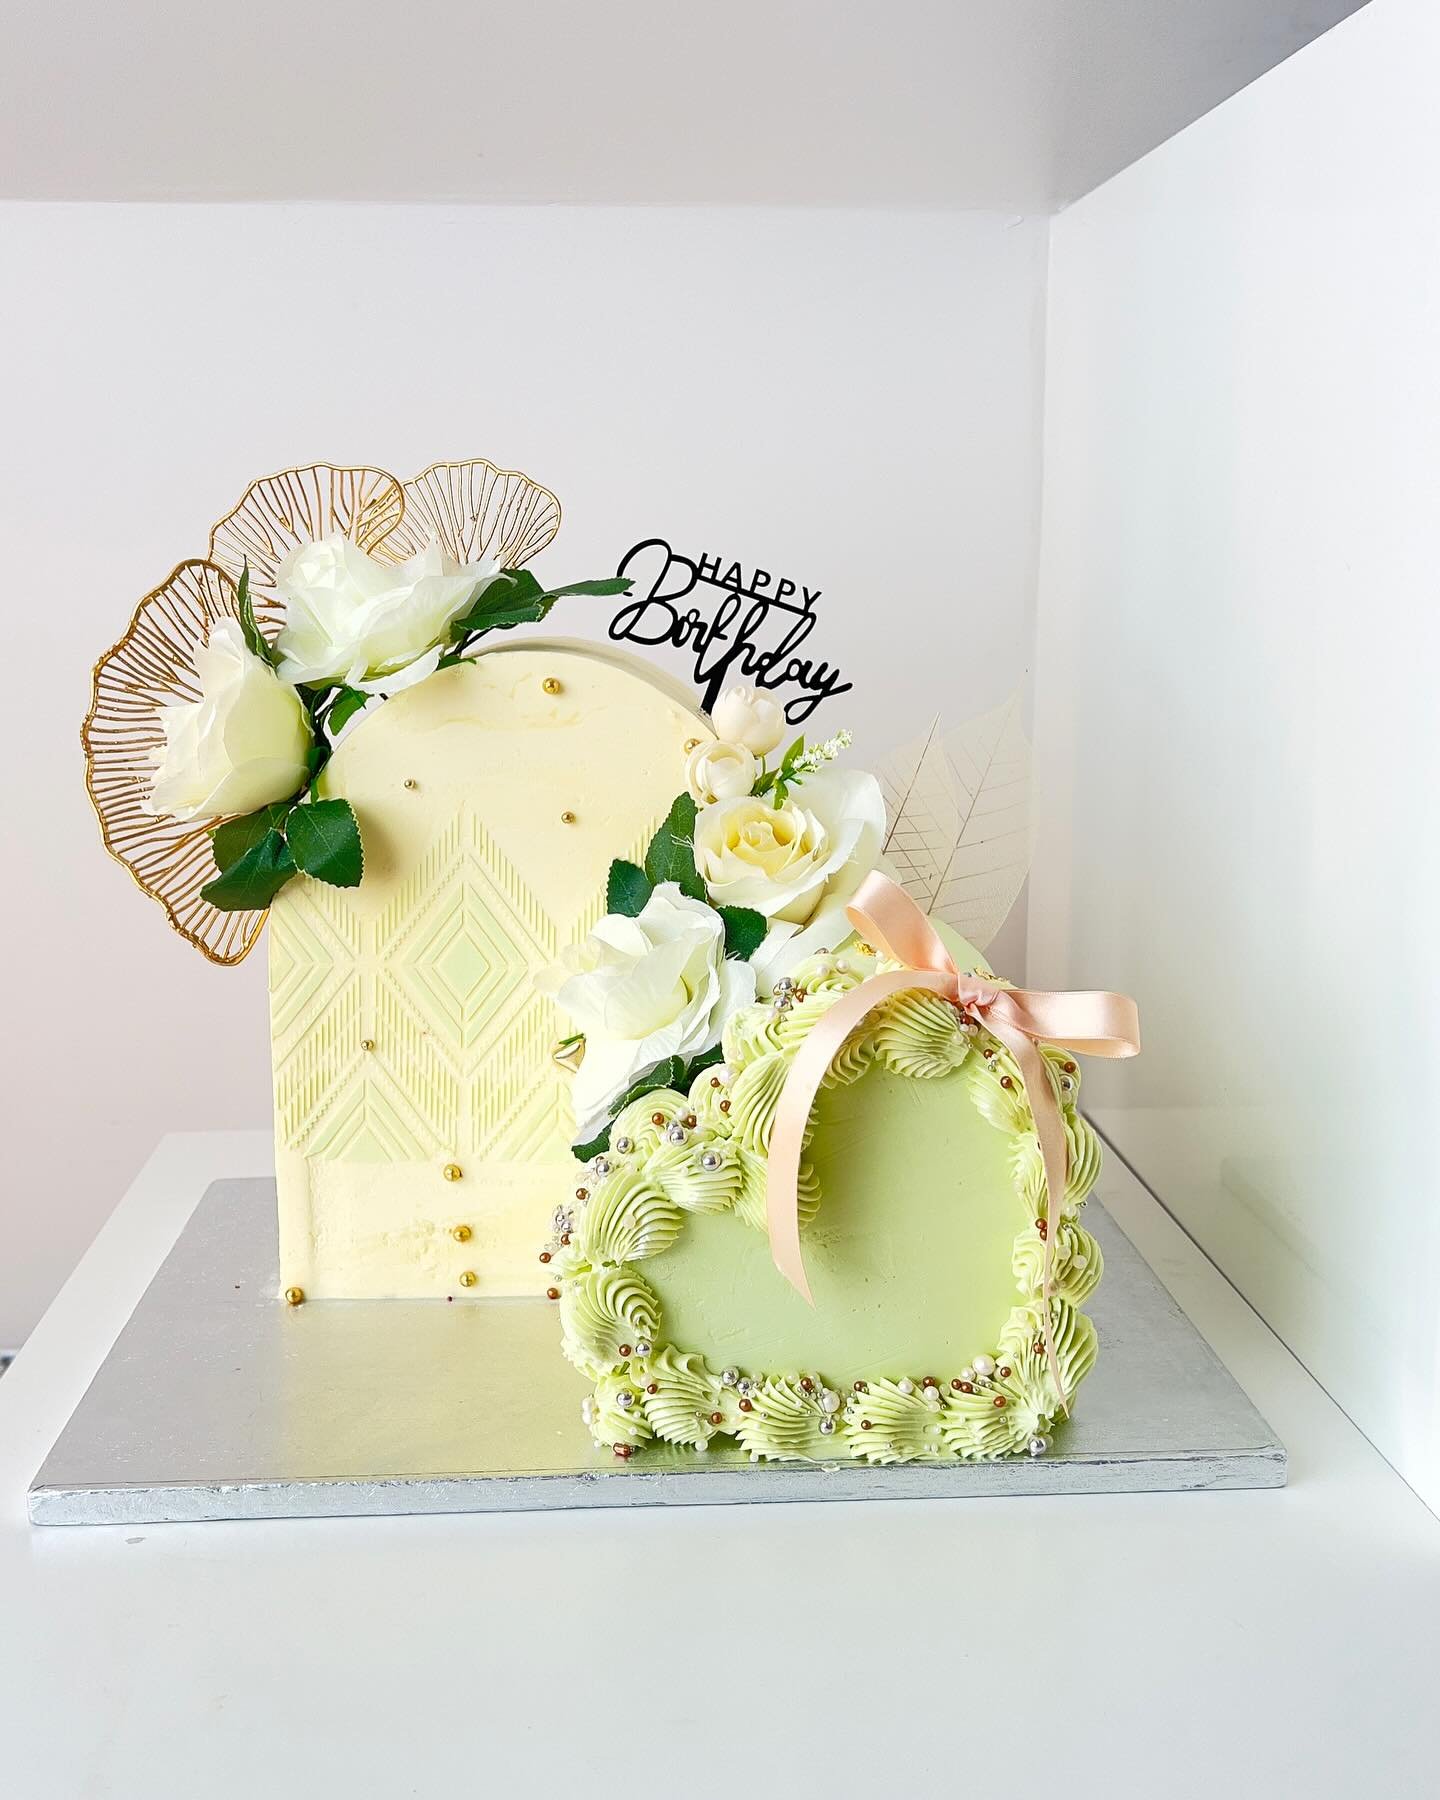 Arch and Heart shape combo.

Layers of carrot cake filled with cheese frosting and vanilla sponge layers.
Perfect for a classy and beautiful lady/woman.

Need a cake for your next occasion in Hampshire and its environment, please hit the link in the 